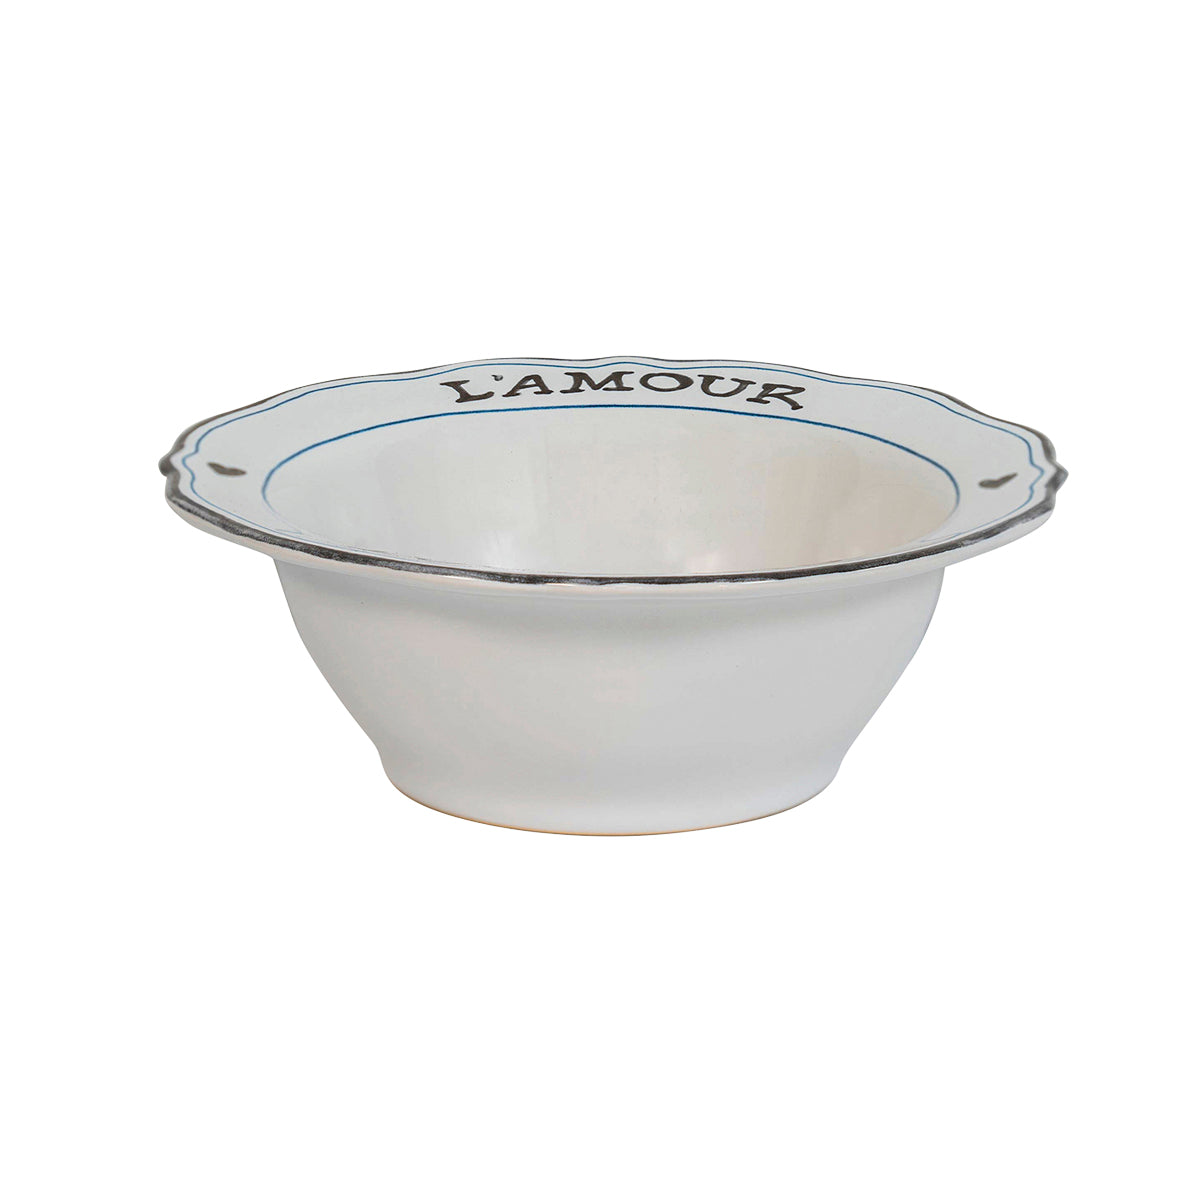 L'Amour Toujours Cereal-Ice Cream Bowl Set-4-2nd